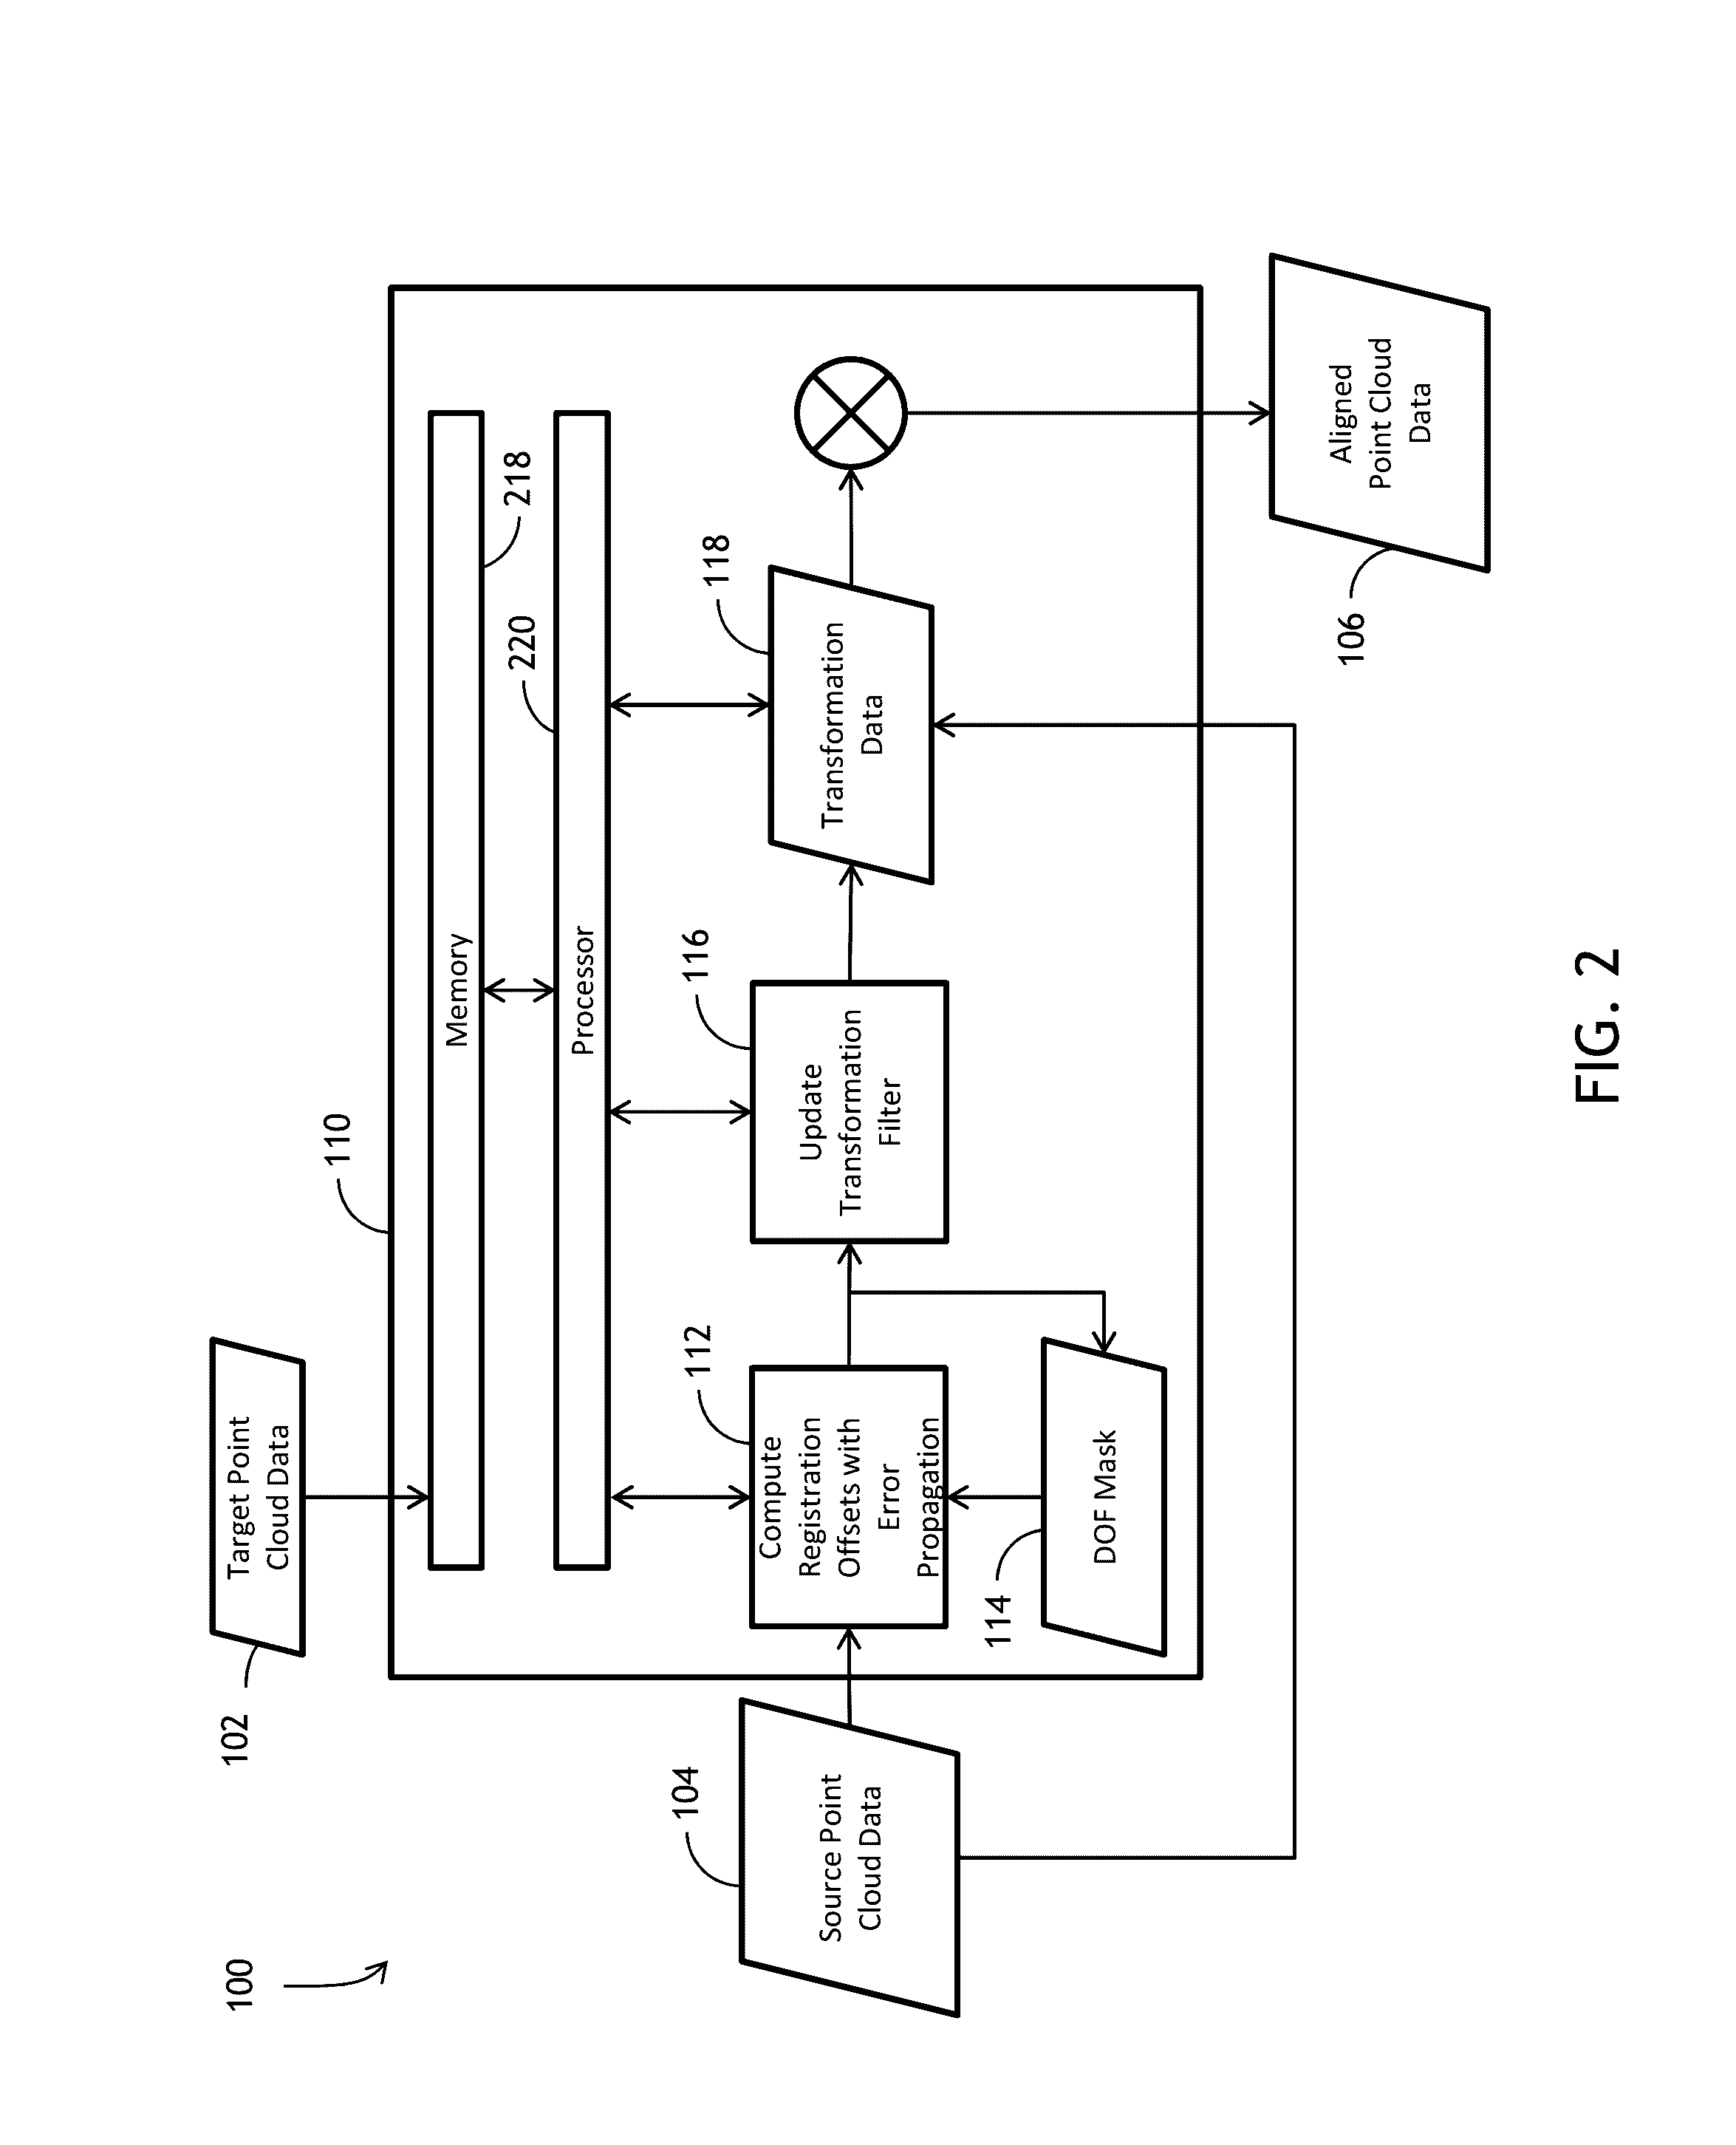 Variable environment high integrity registration transformation system and related method